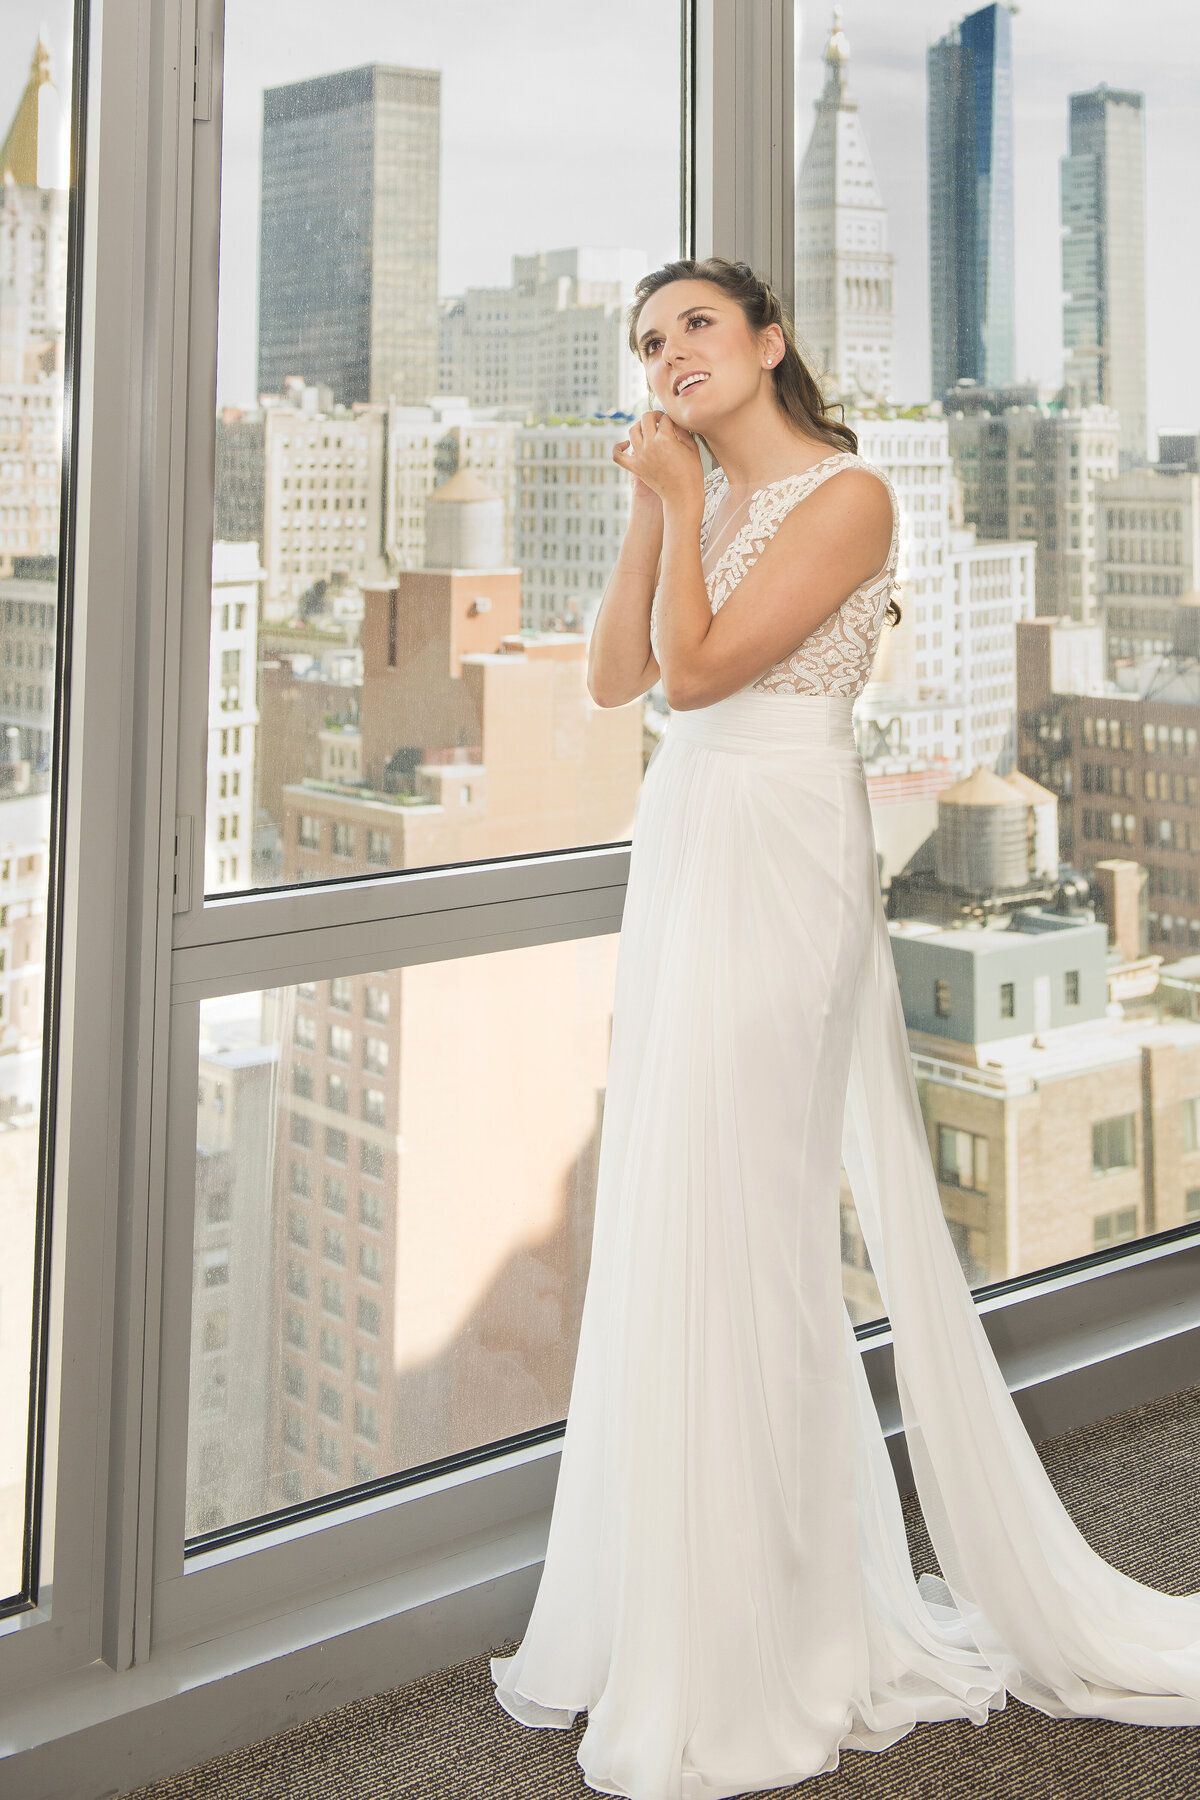 neutral-glam-wedding-makeup-pier-sixty-the-lighthouse-nyc-wedding-anabelle-makeup-7